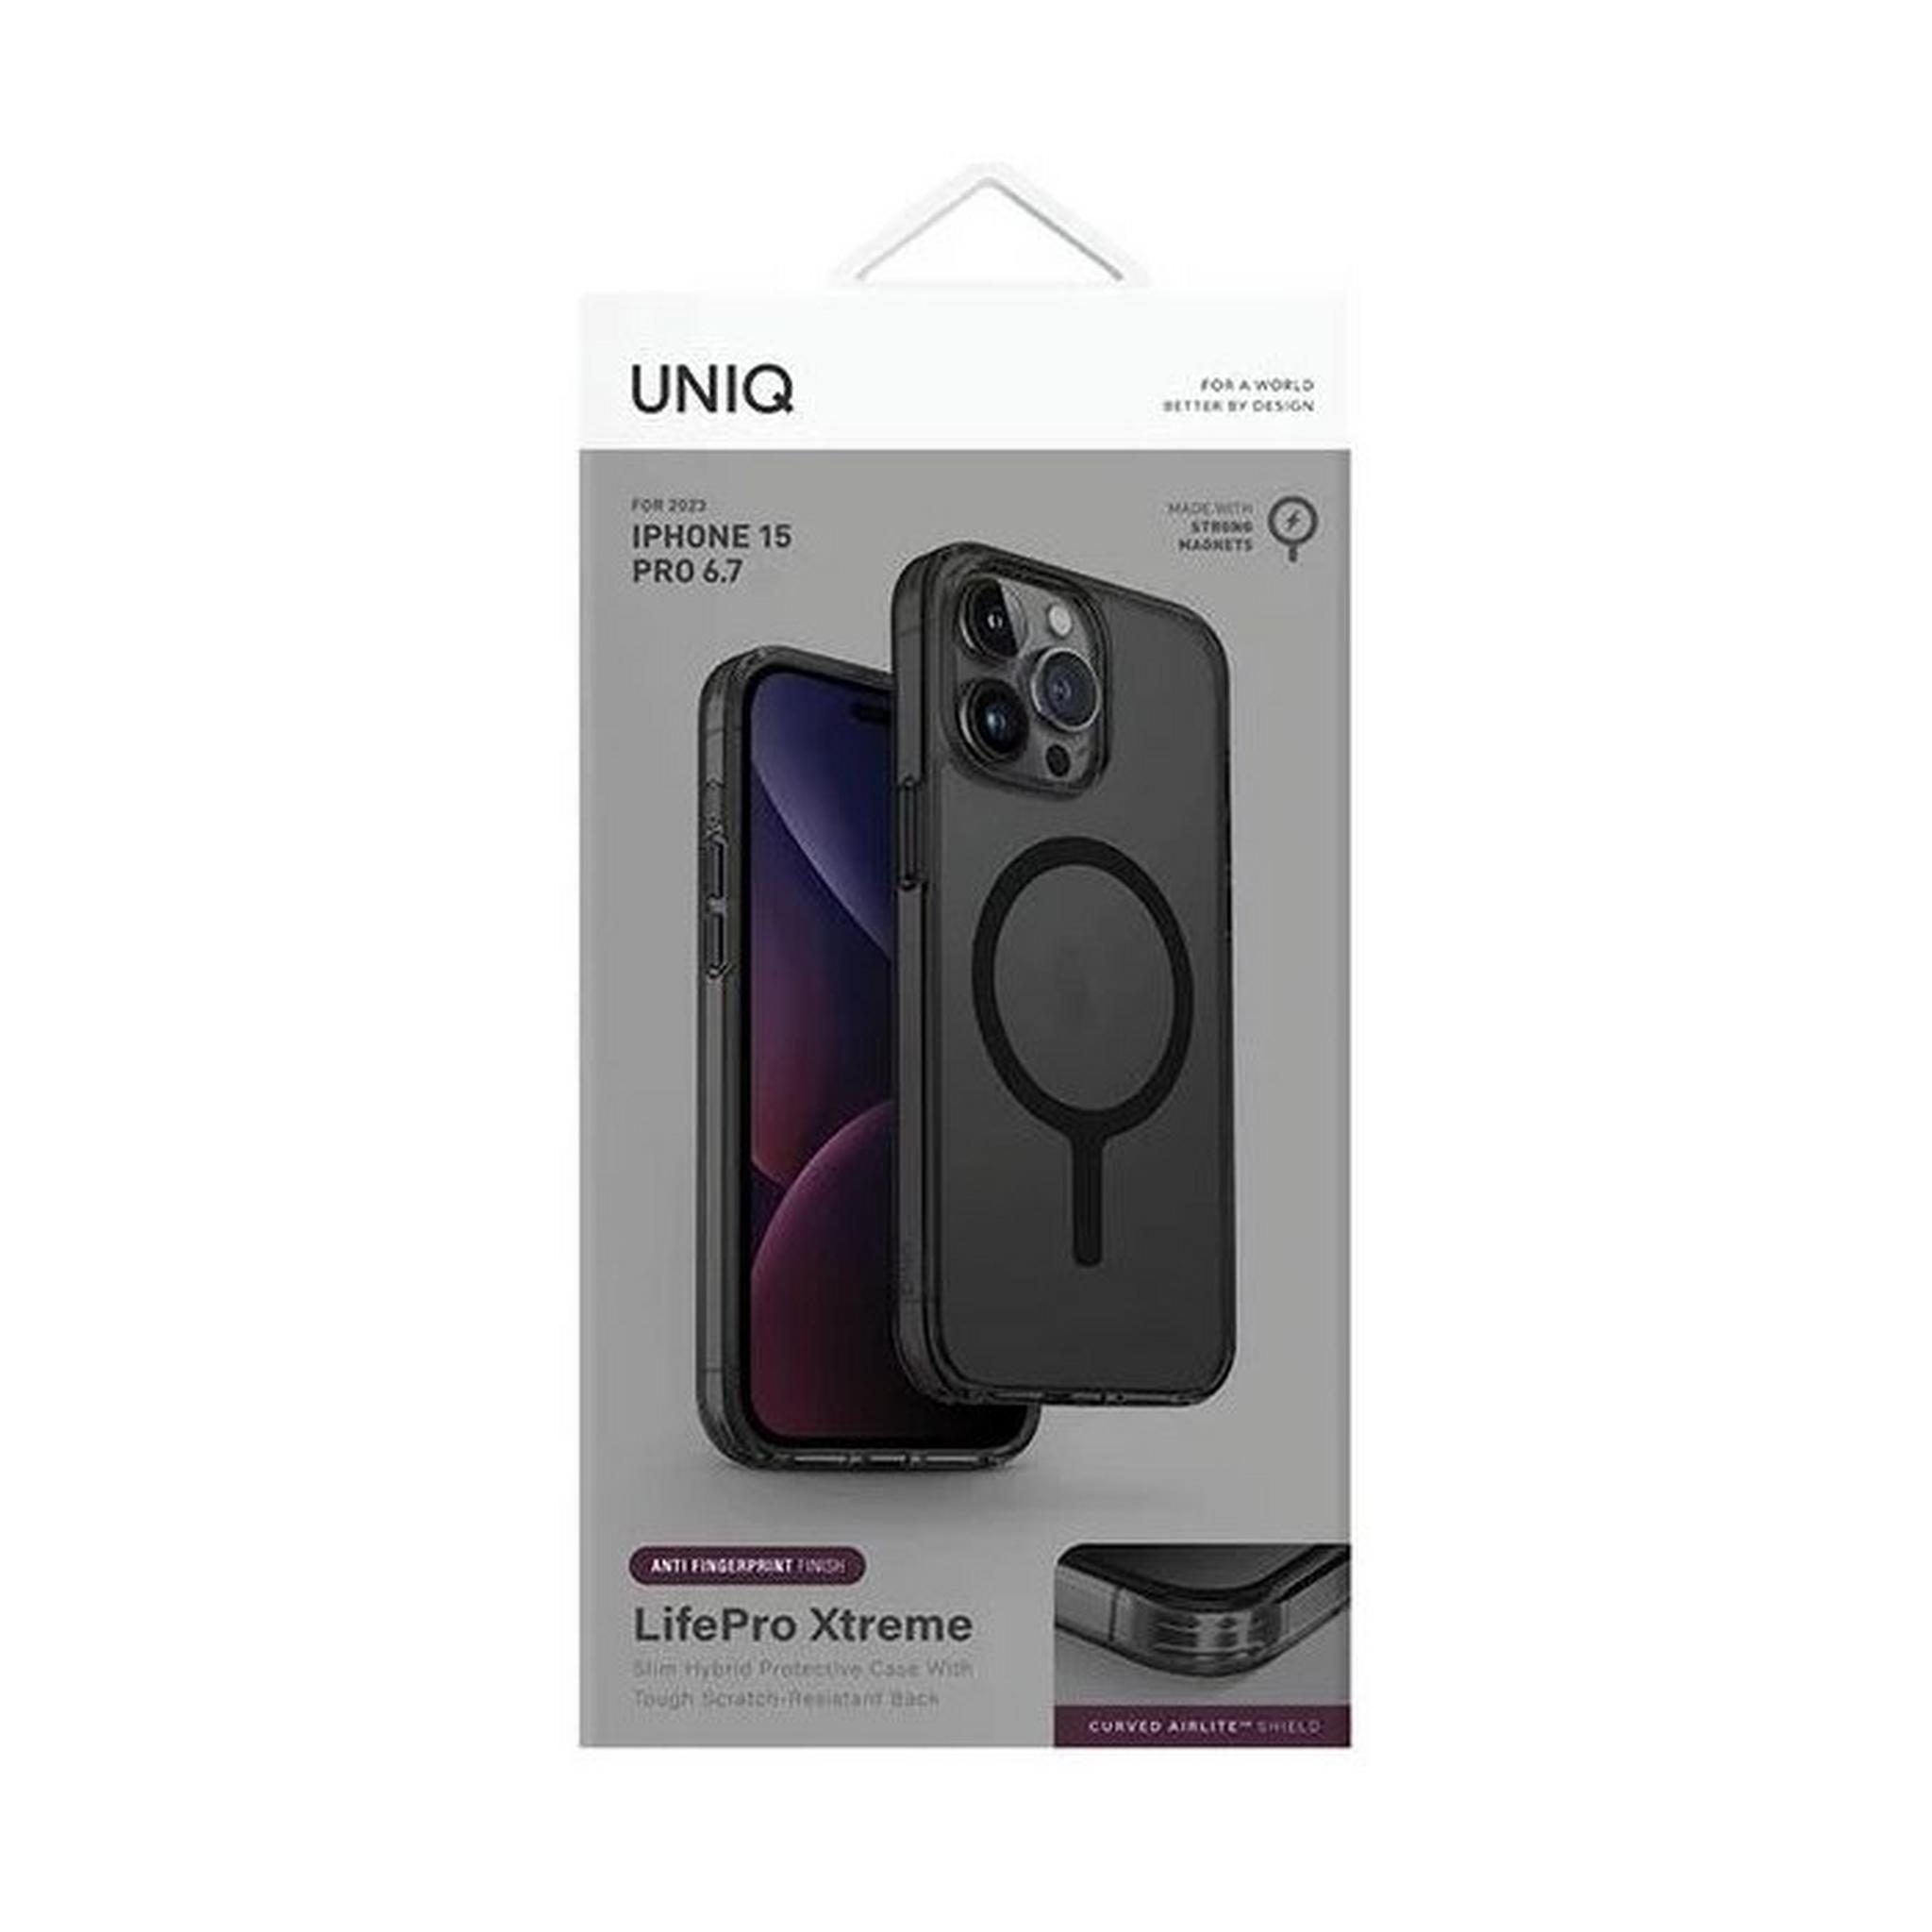 UNIQ MagSafe Lifepro Xtreme Case for 6.7-inch iPhone 15 Pro Max, 8886463685617 - Frost Smoke